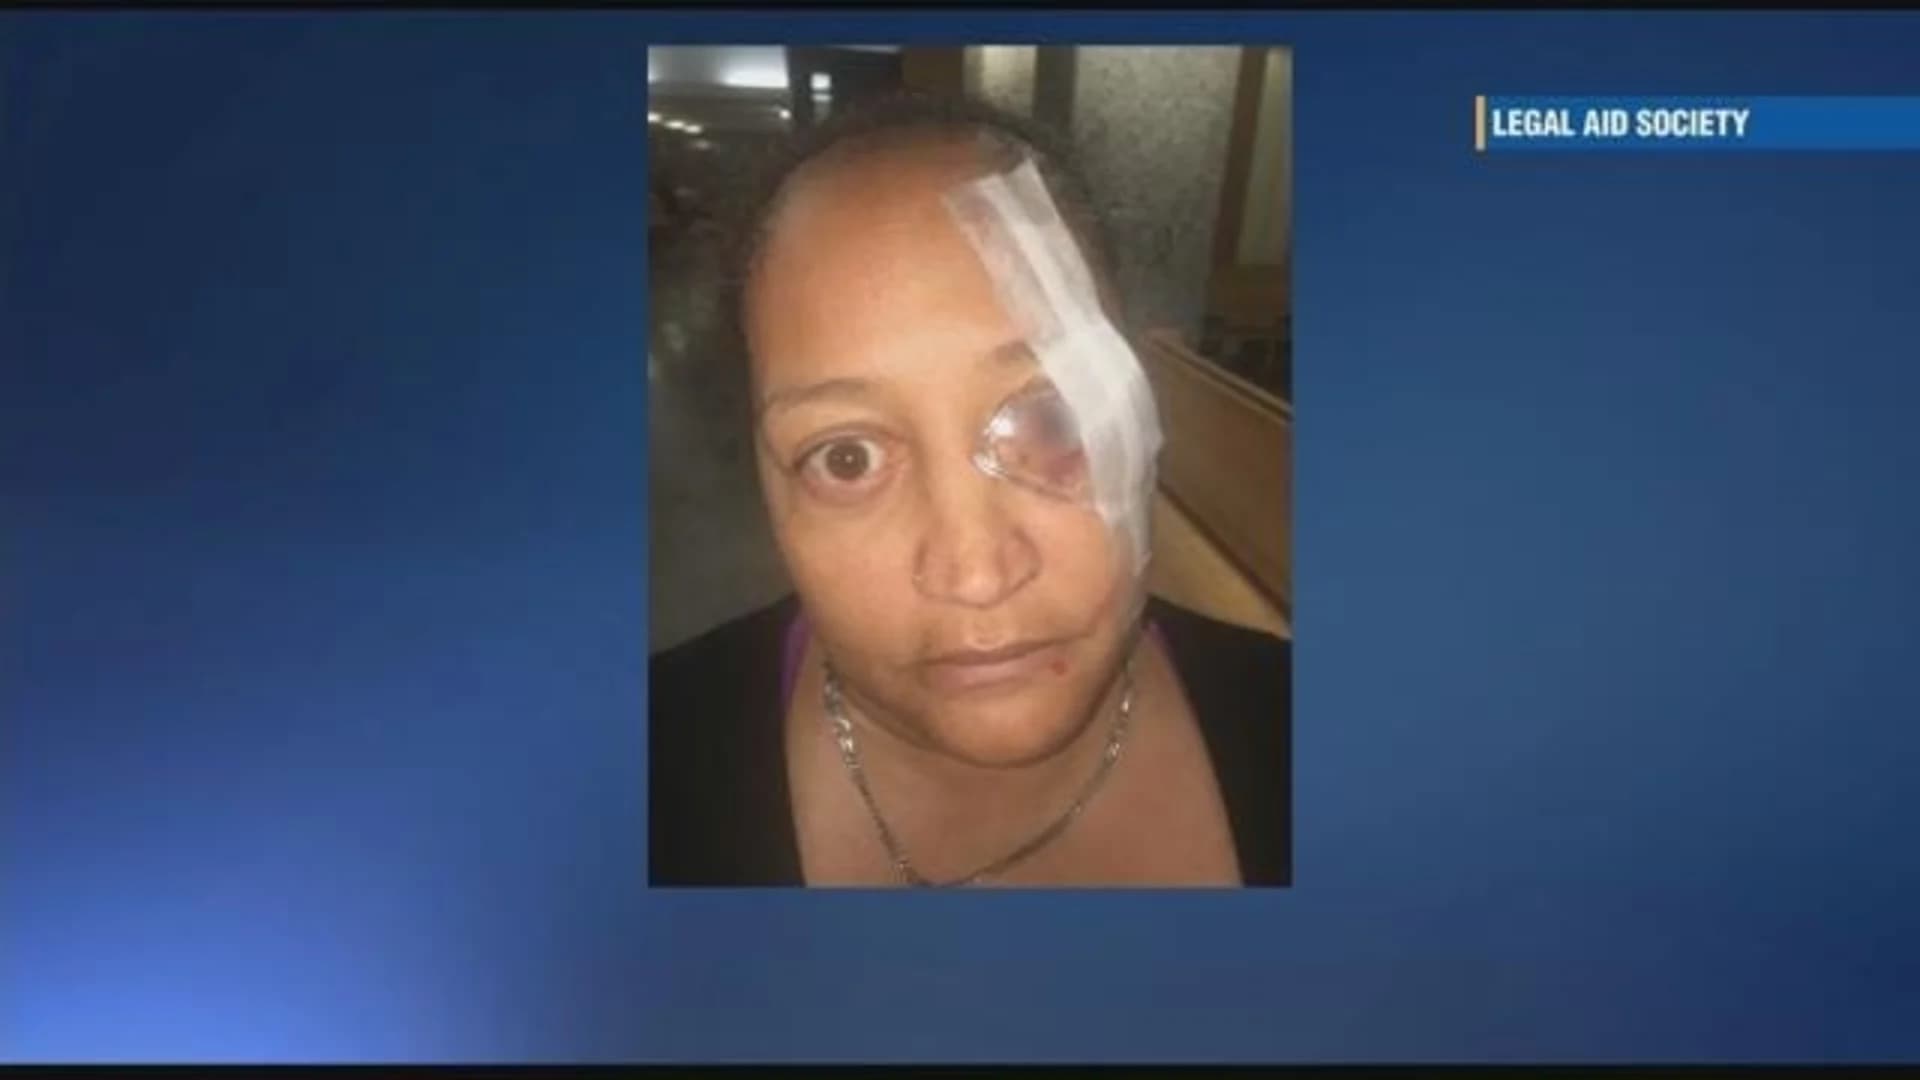 Woman claims altercation with officer knocked eye out of socket